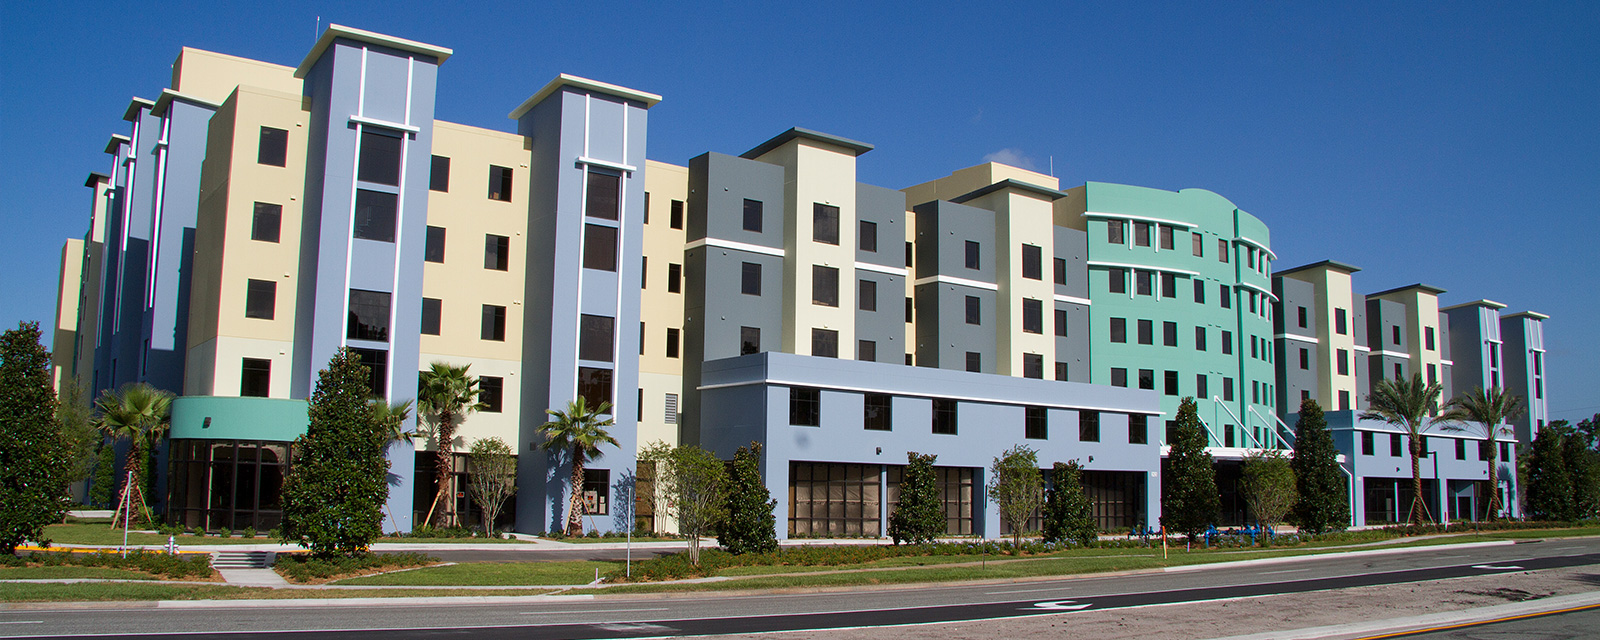 University of Central Florida (UCF) Northview Student Housing DRMP